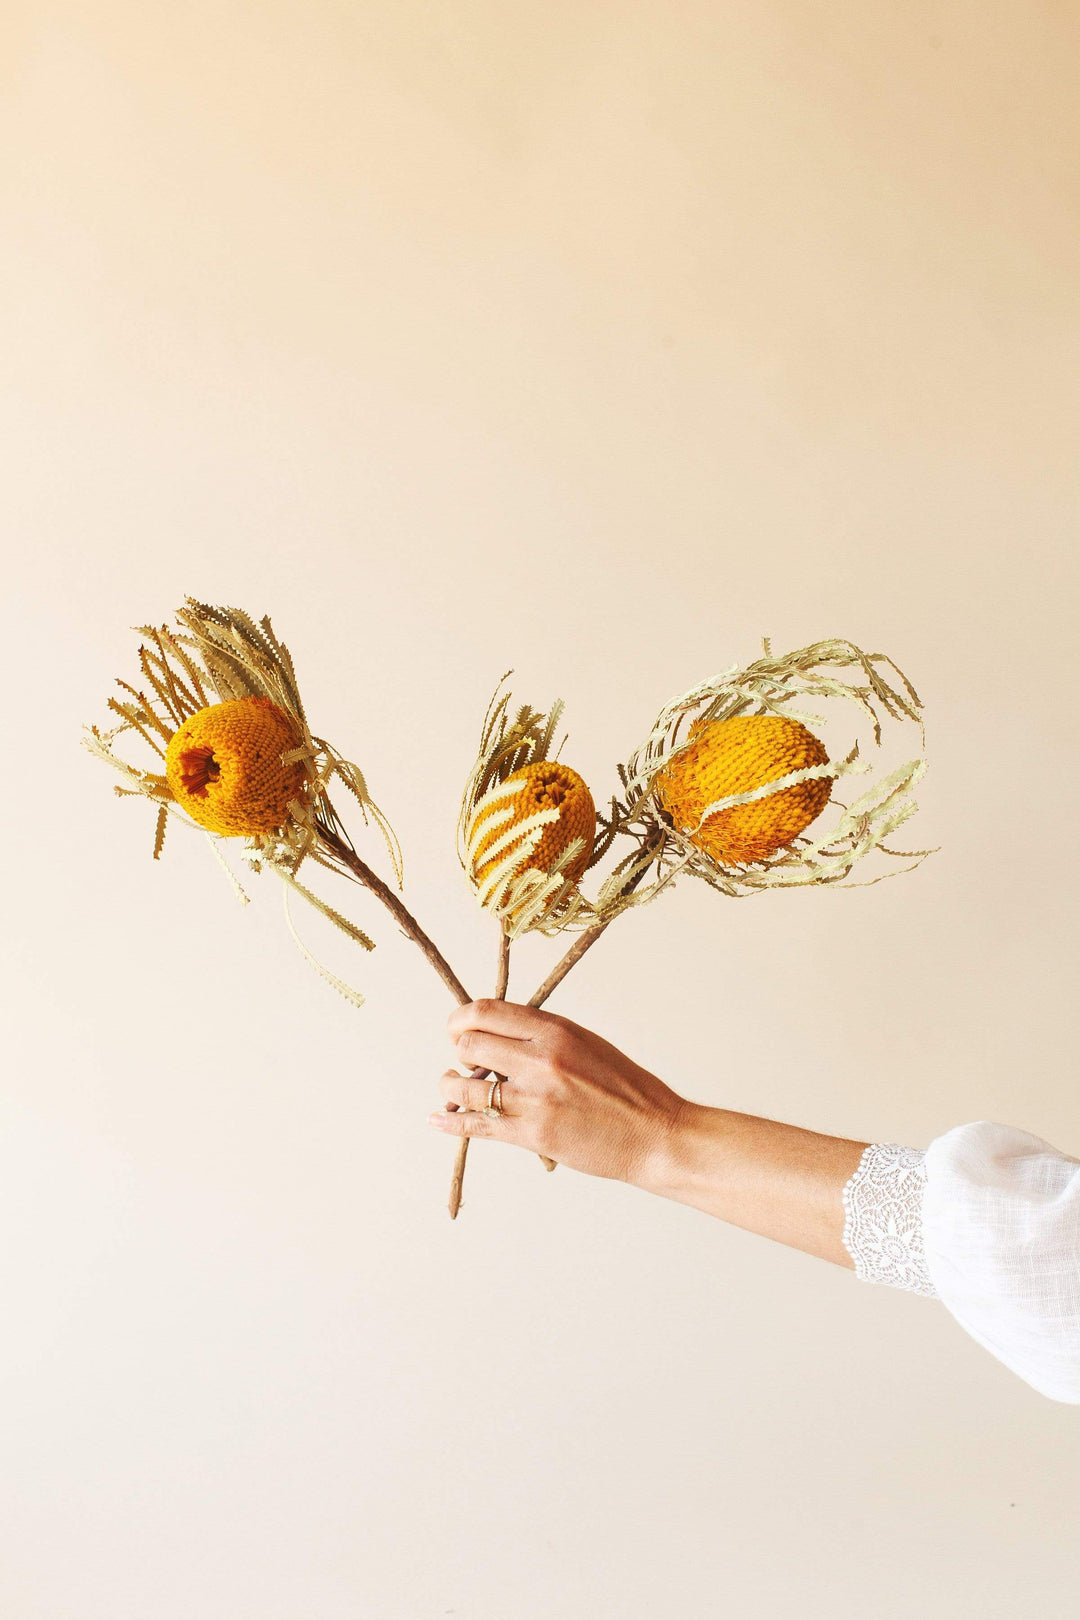 Idlewild Floral Co. Dried Yellow Banksia